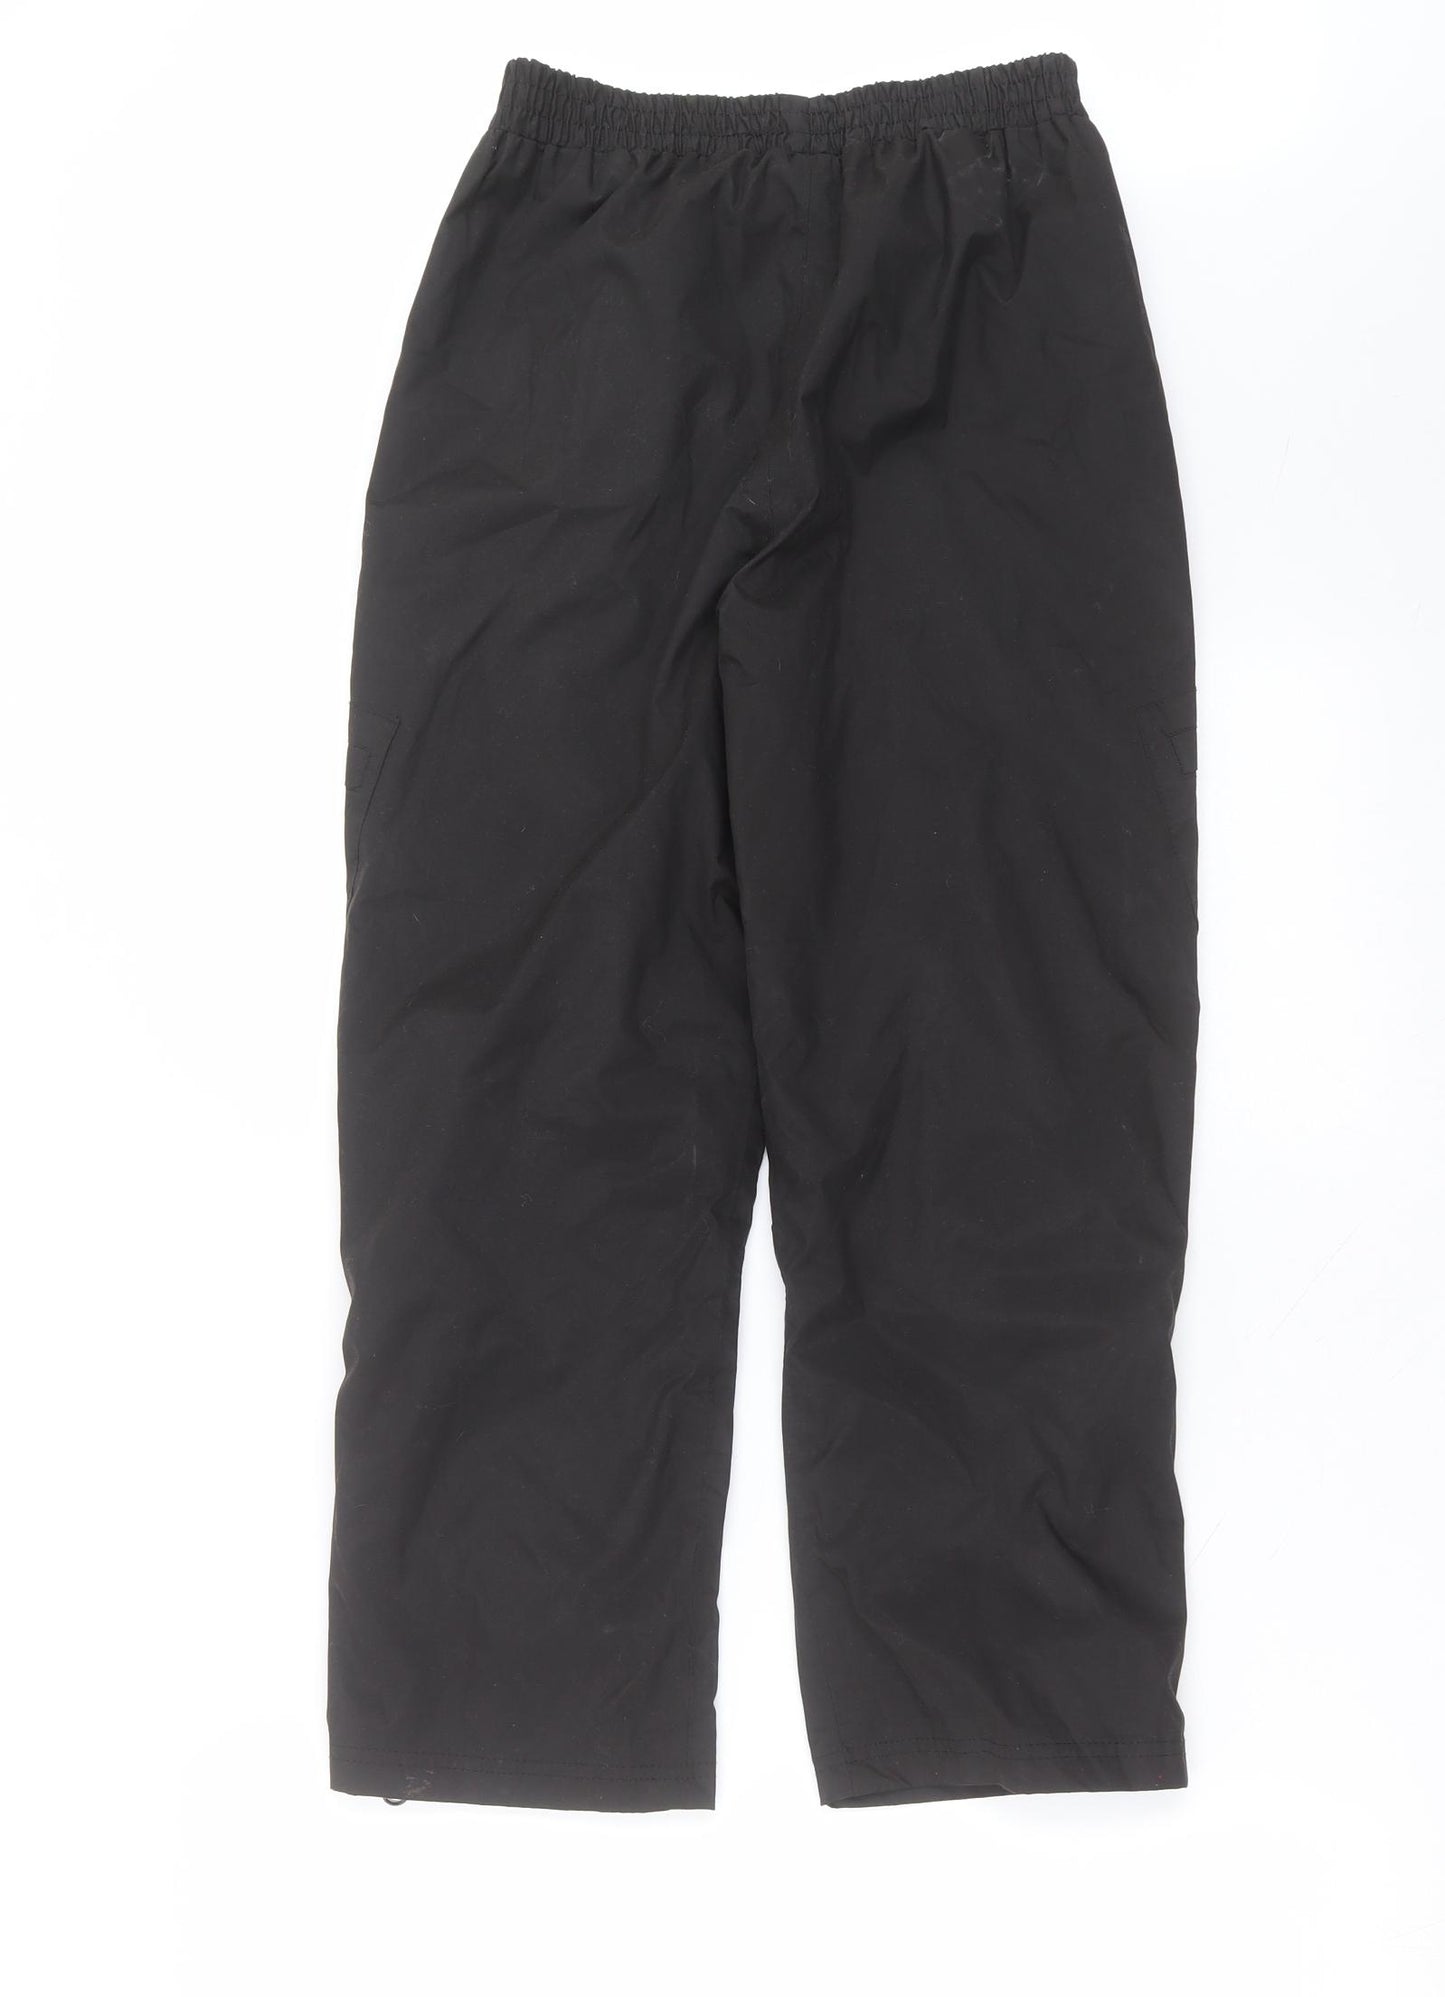 Peter Storm Boys Black  Polyester Jogger Trousers Size 9-10 Years  Regular